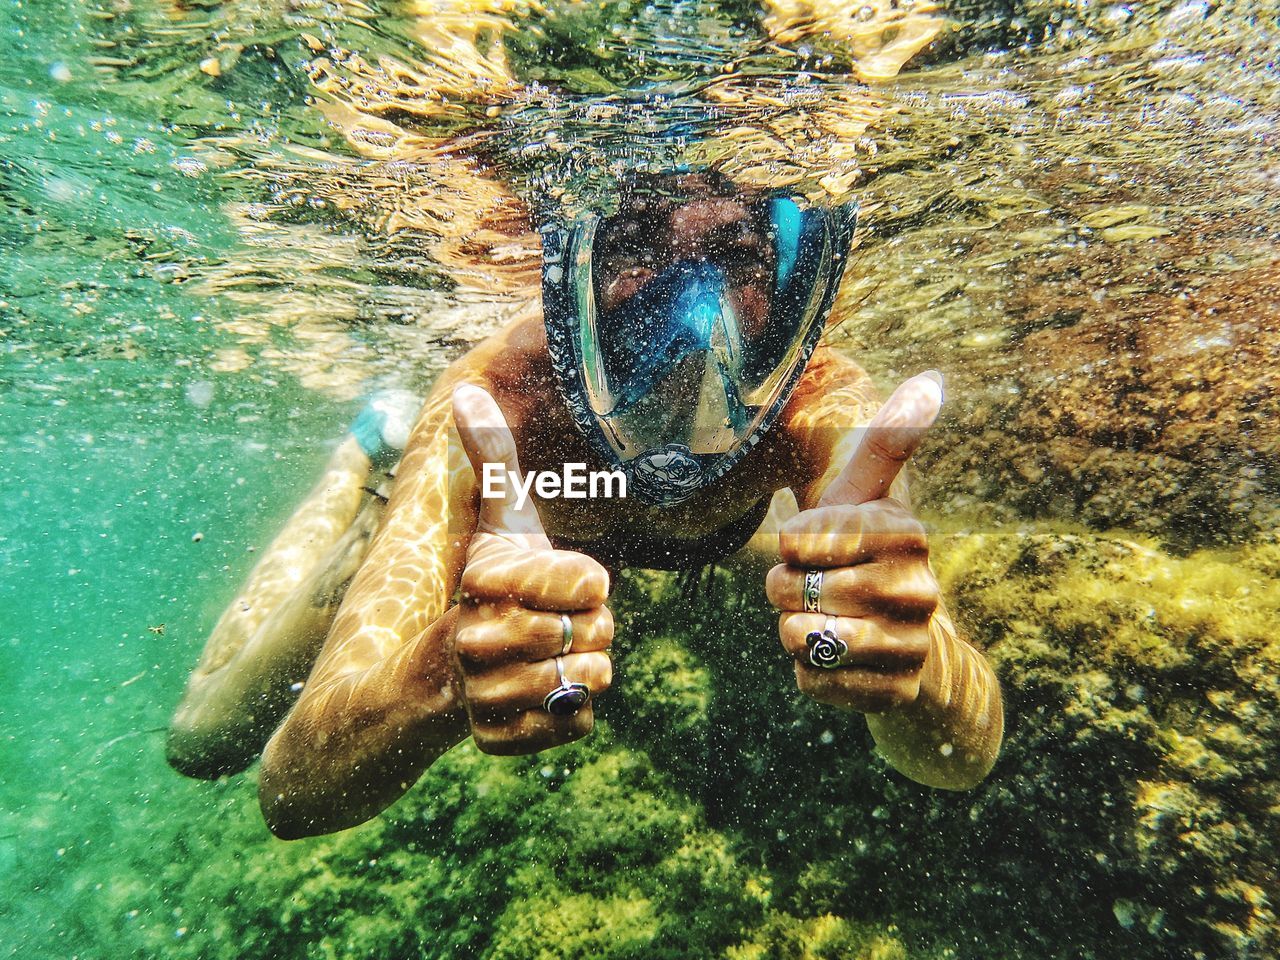 Portrait of woman showing thumbs up while swimming in undersea